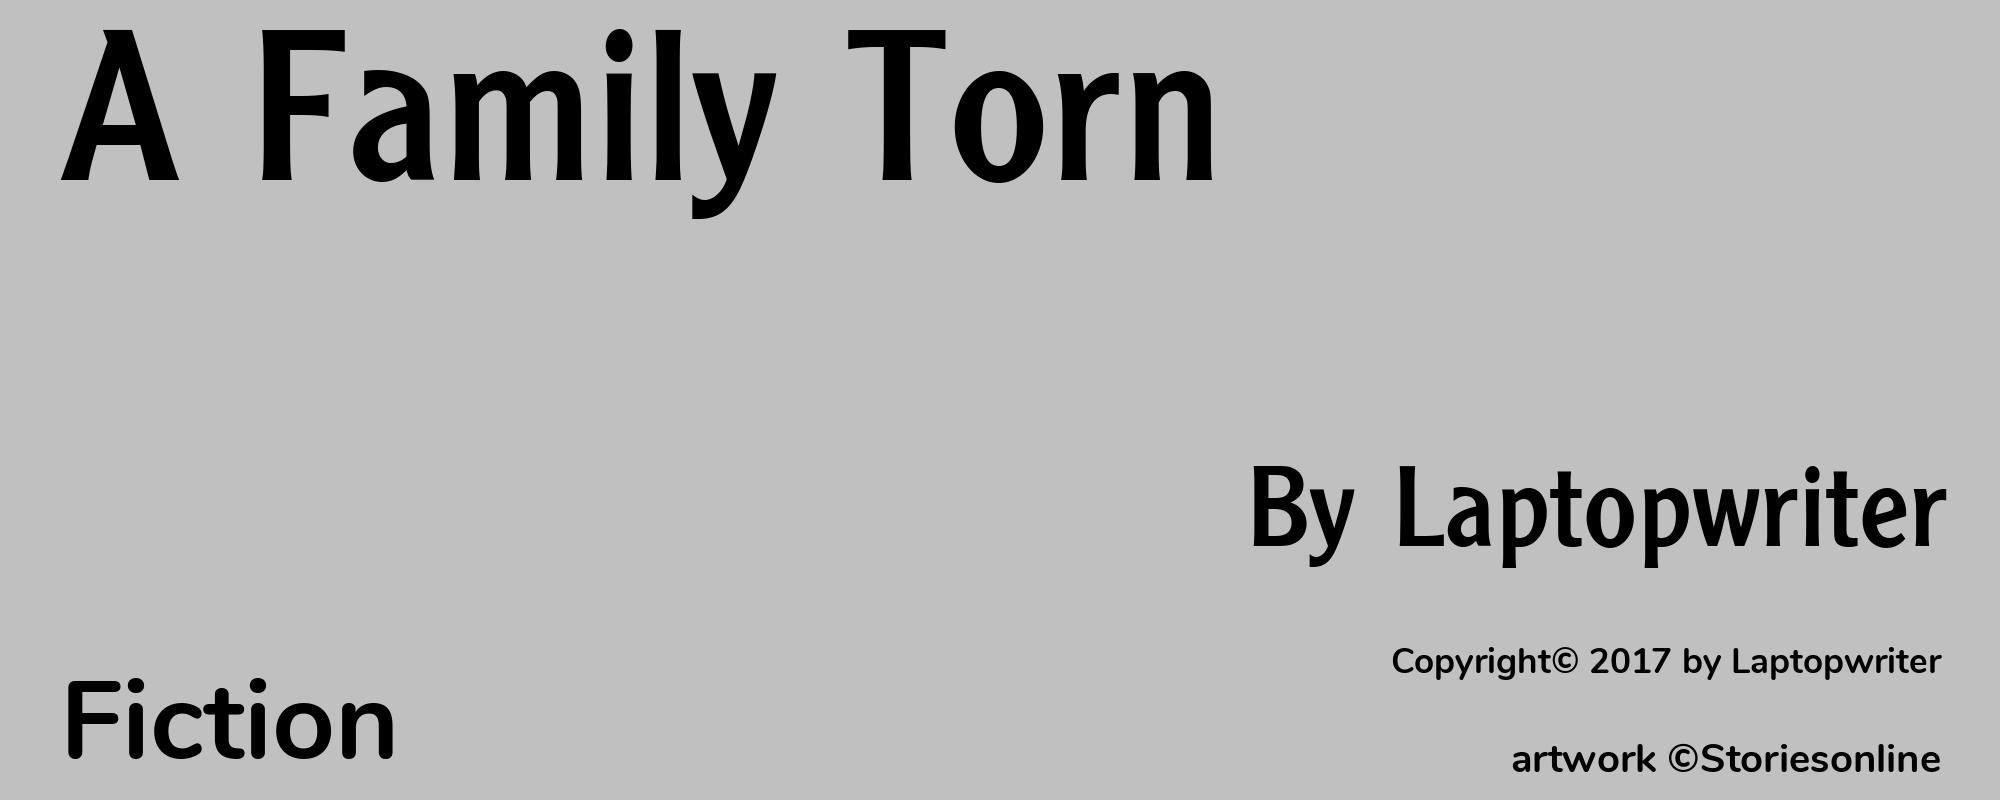 A Family Torn - Cover